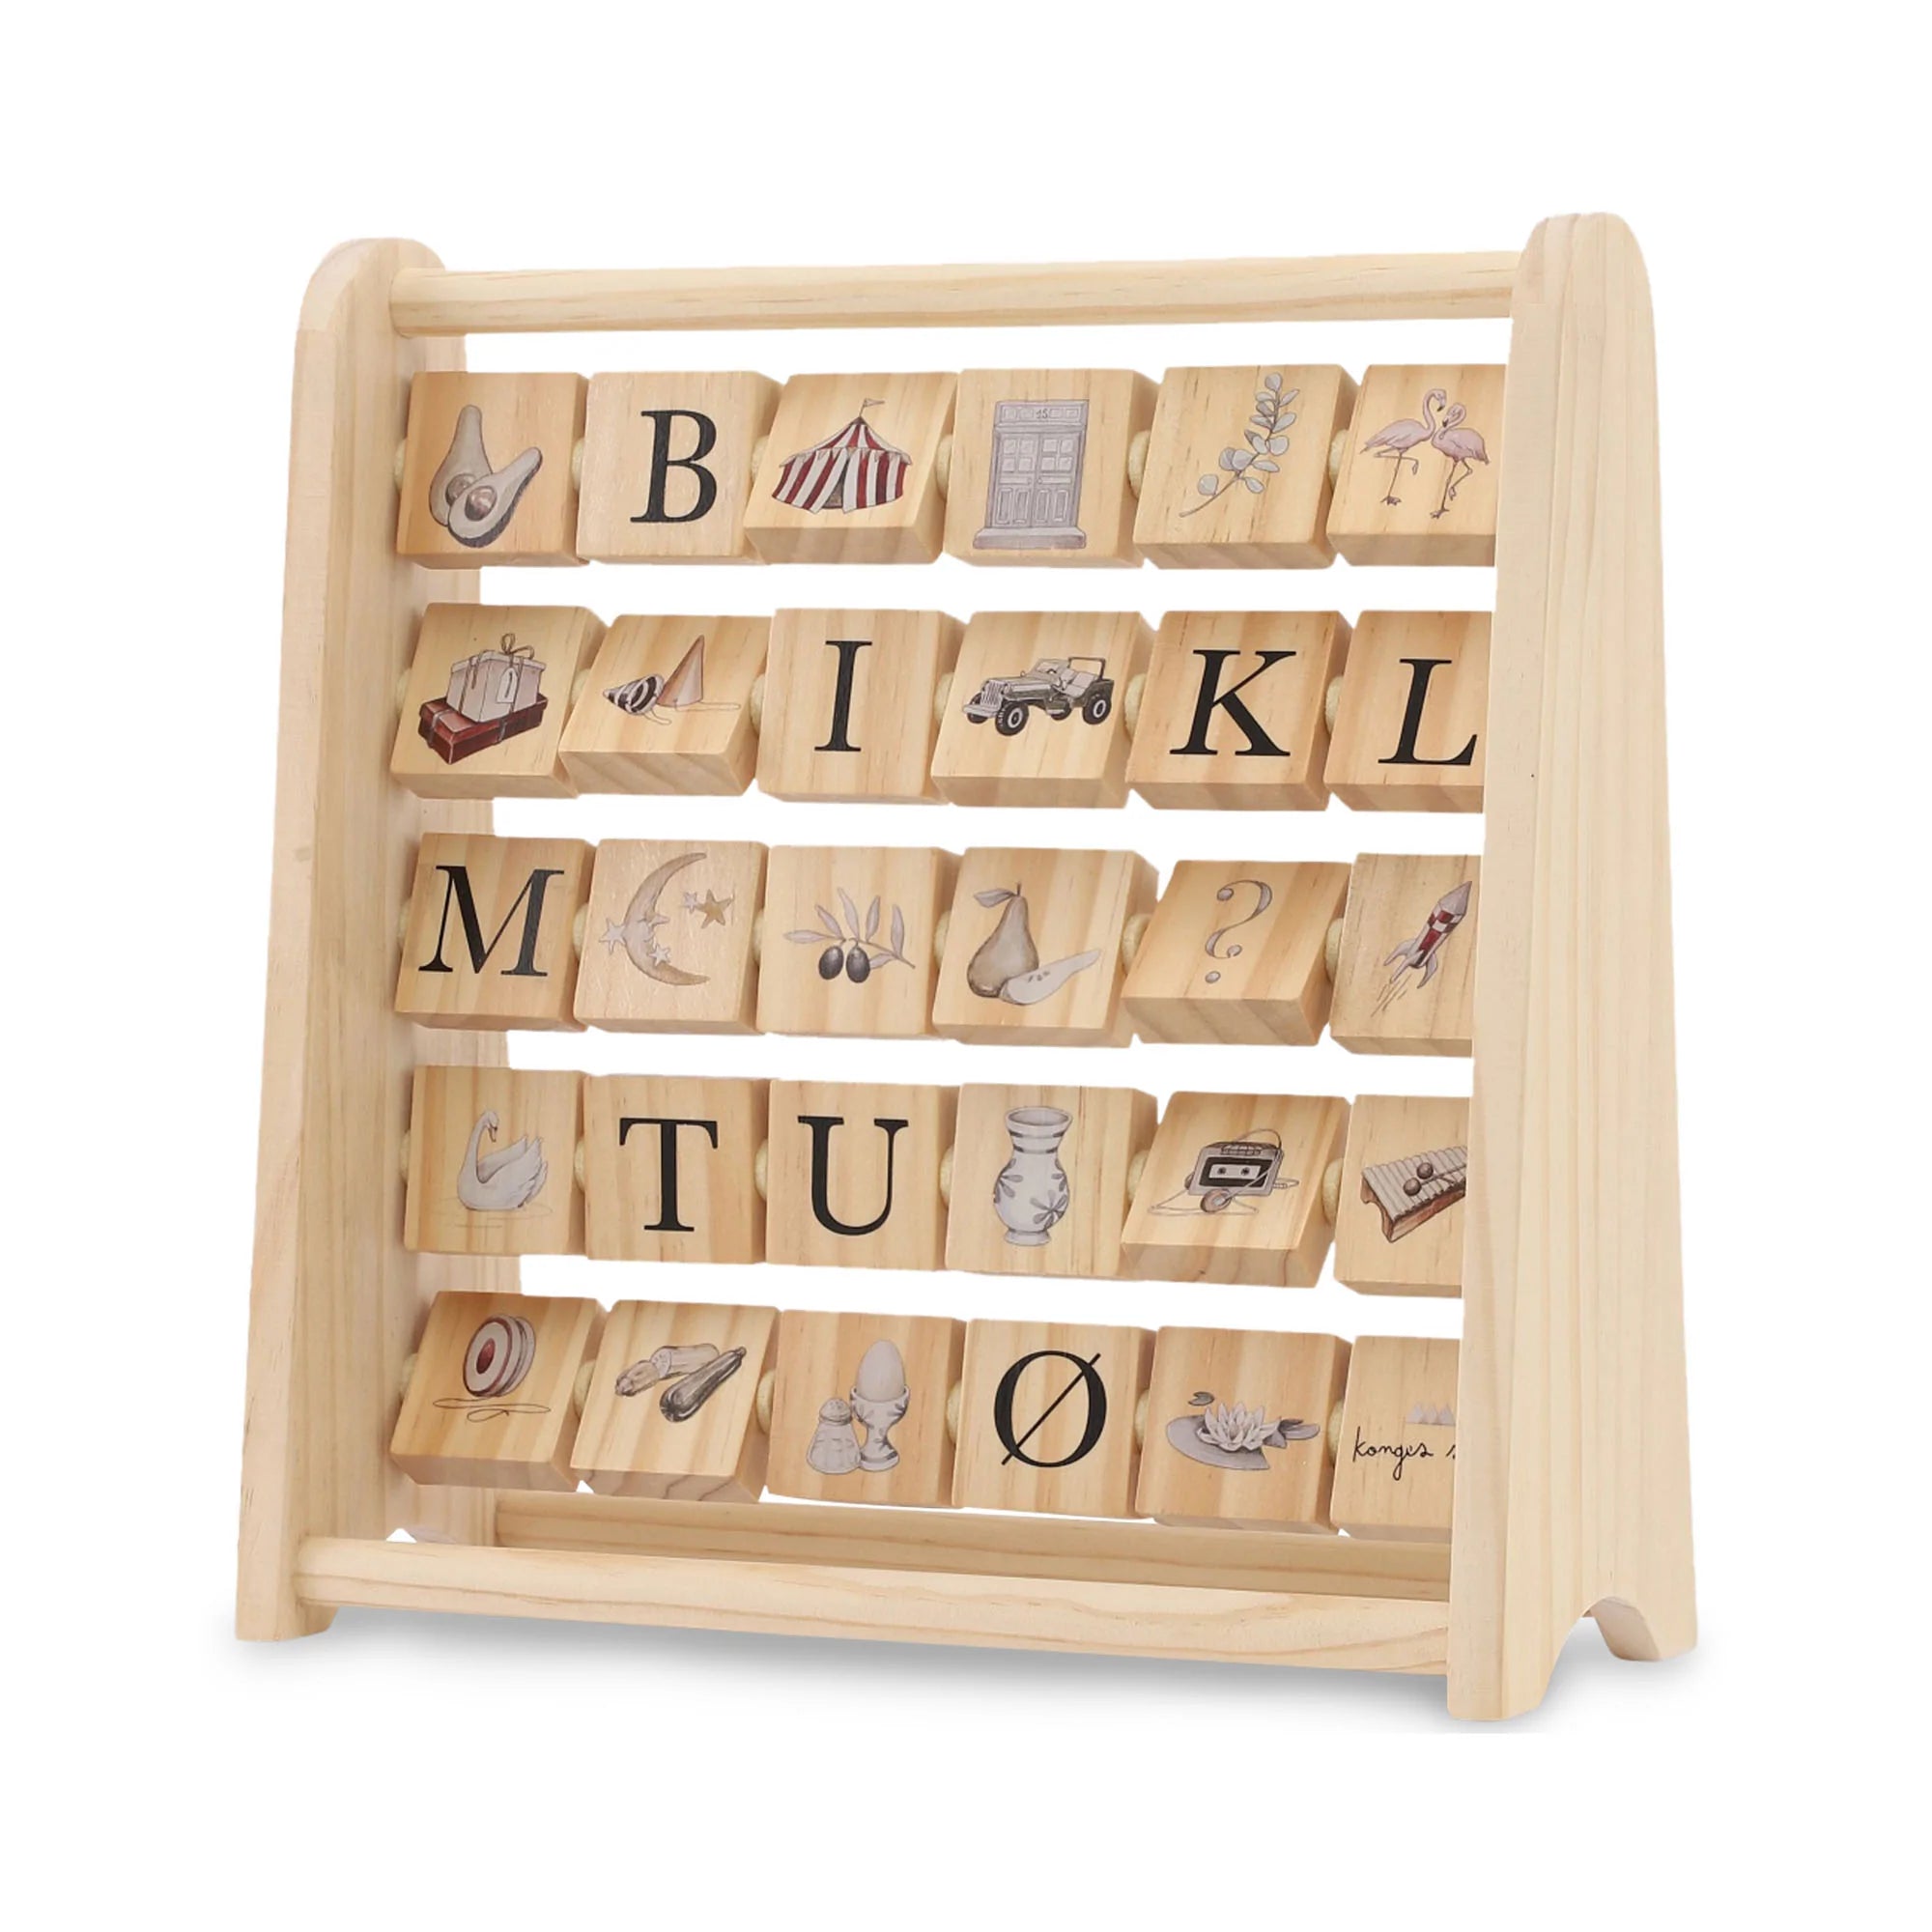 https://cdn.shopify.com/s/files/1/2885/4550/products/abc-wooden-block-frame-by-konges-slojd-525439.webp